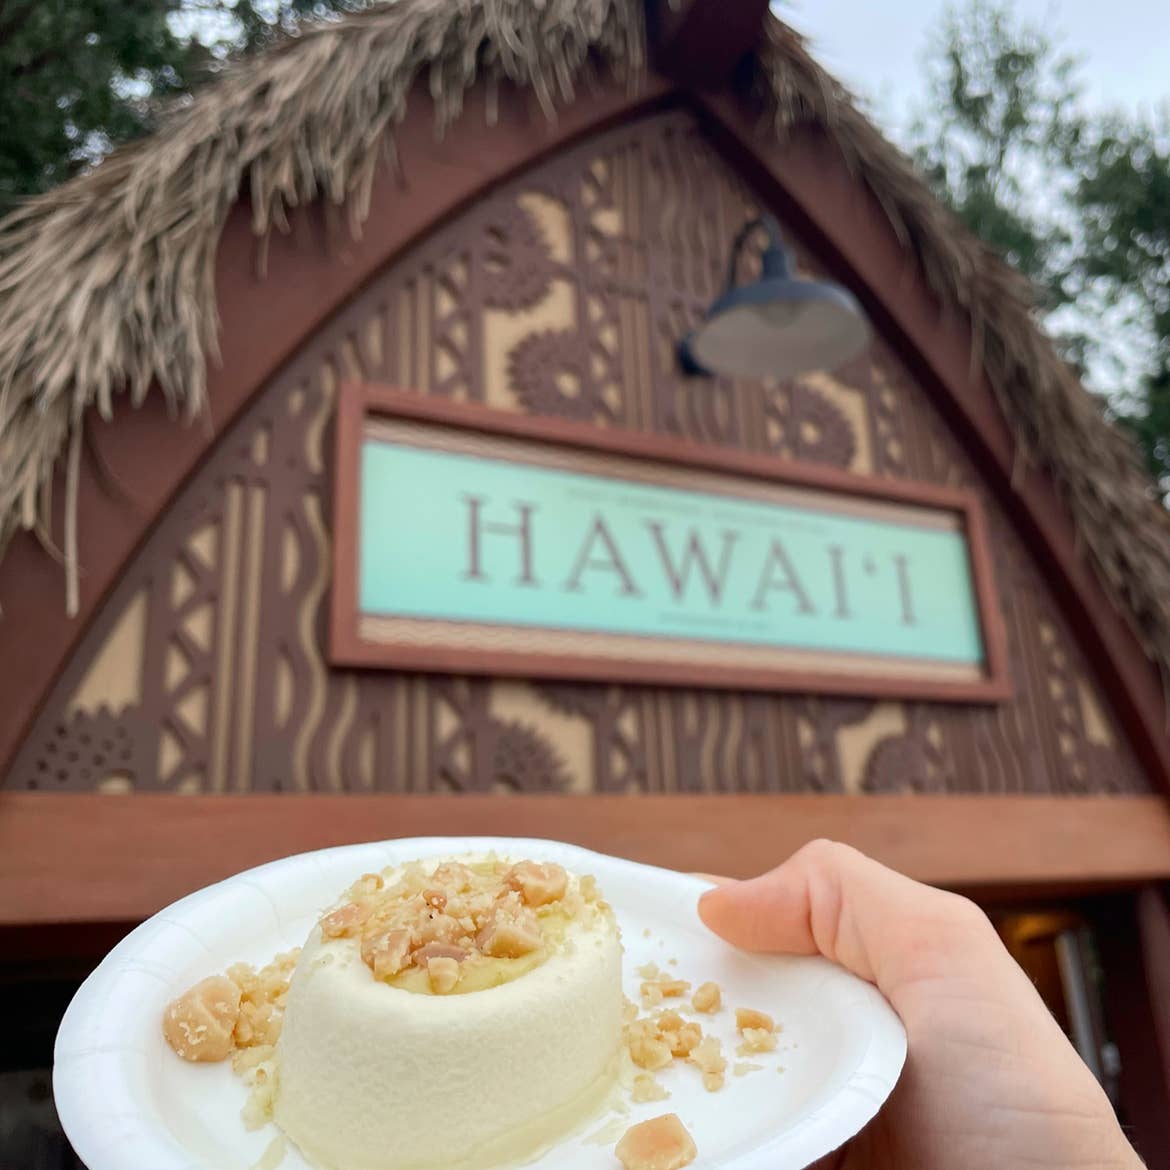 A hand holds a plate containing a Passionfruit Cheesecake with Toasted Macadamia Nuts near the Hawaii kiosk at Epcot.